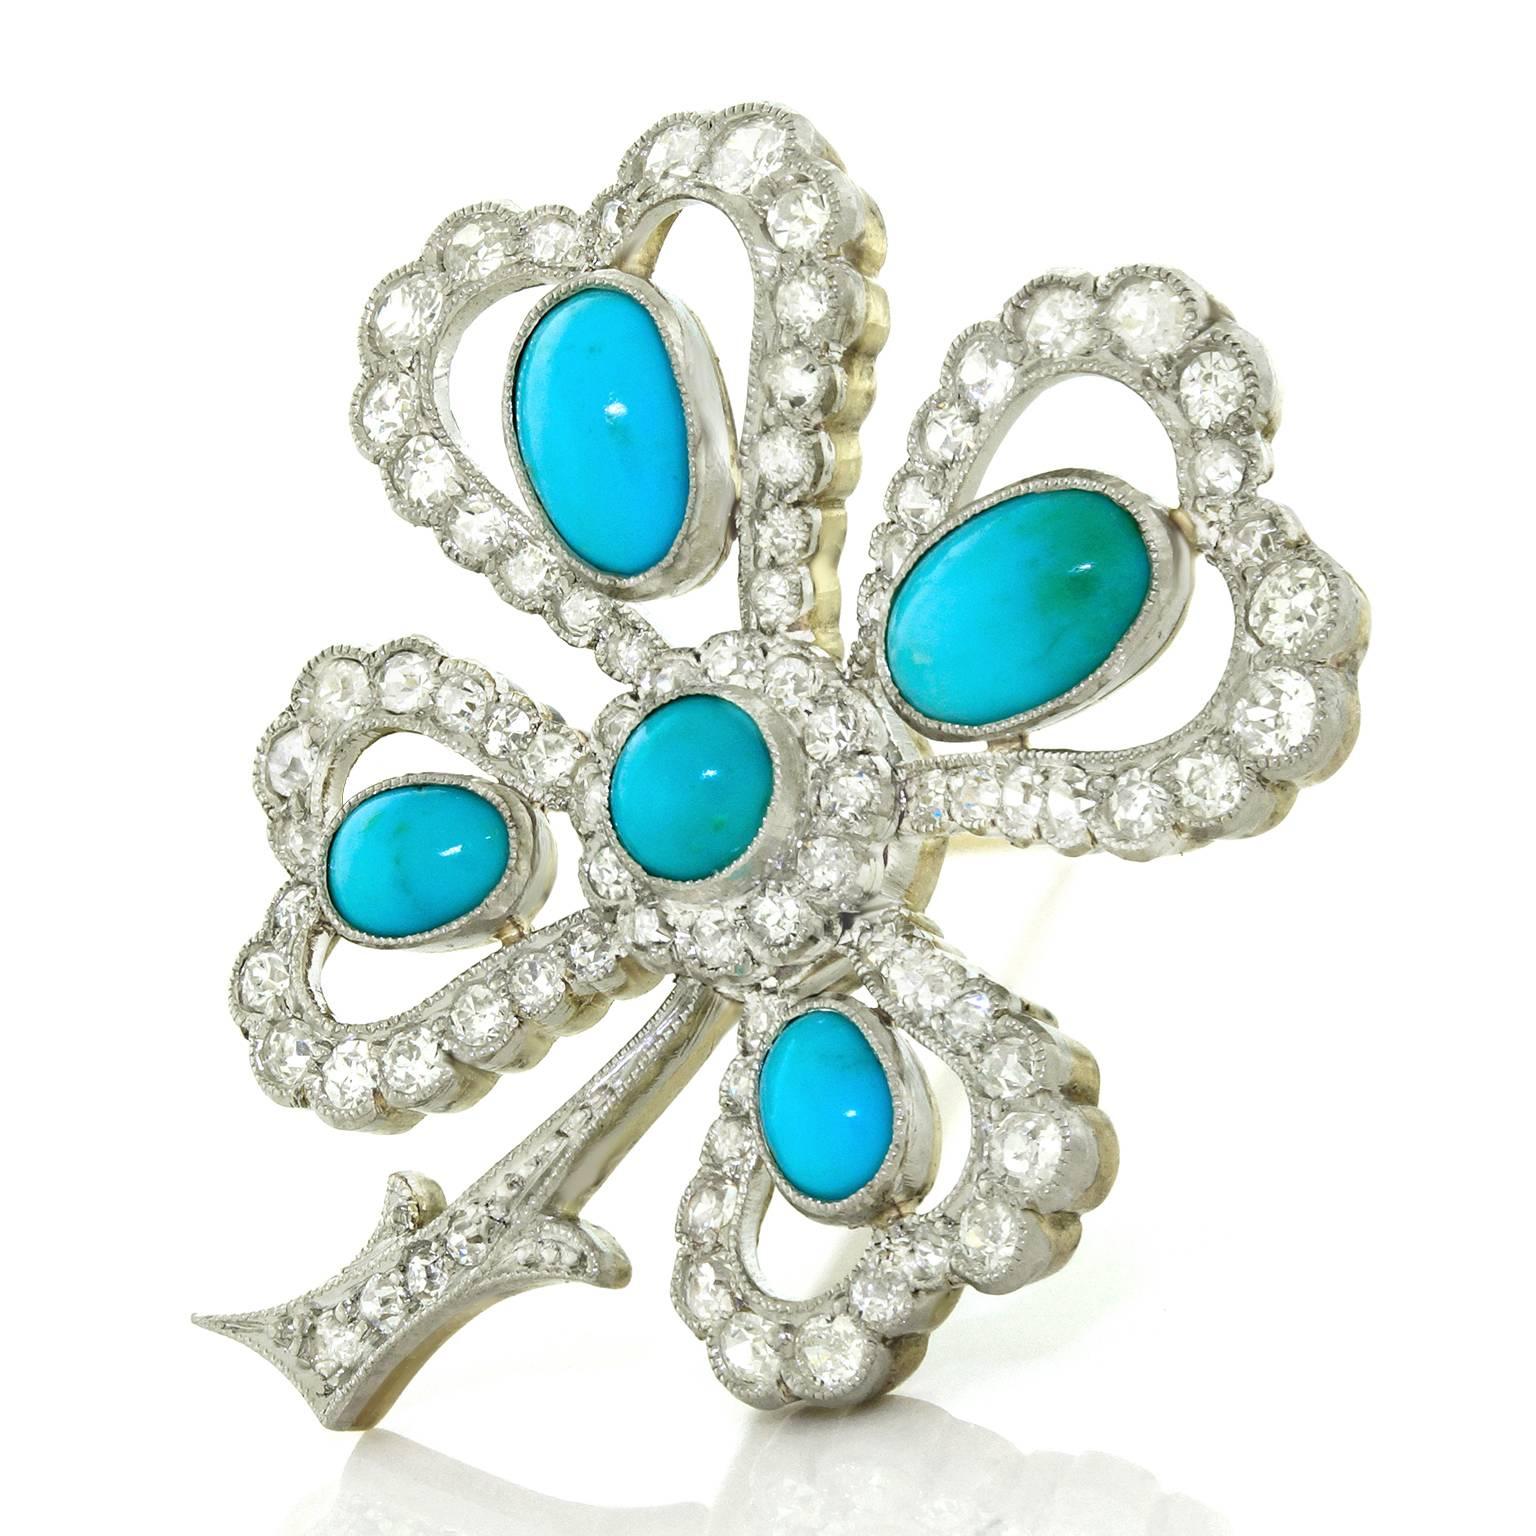 Edwardian Antique Persian Turquoise and Diamond Clover Brooch